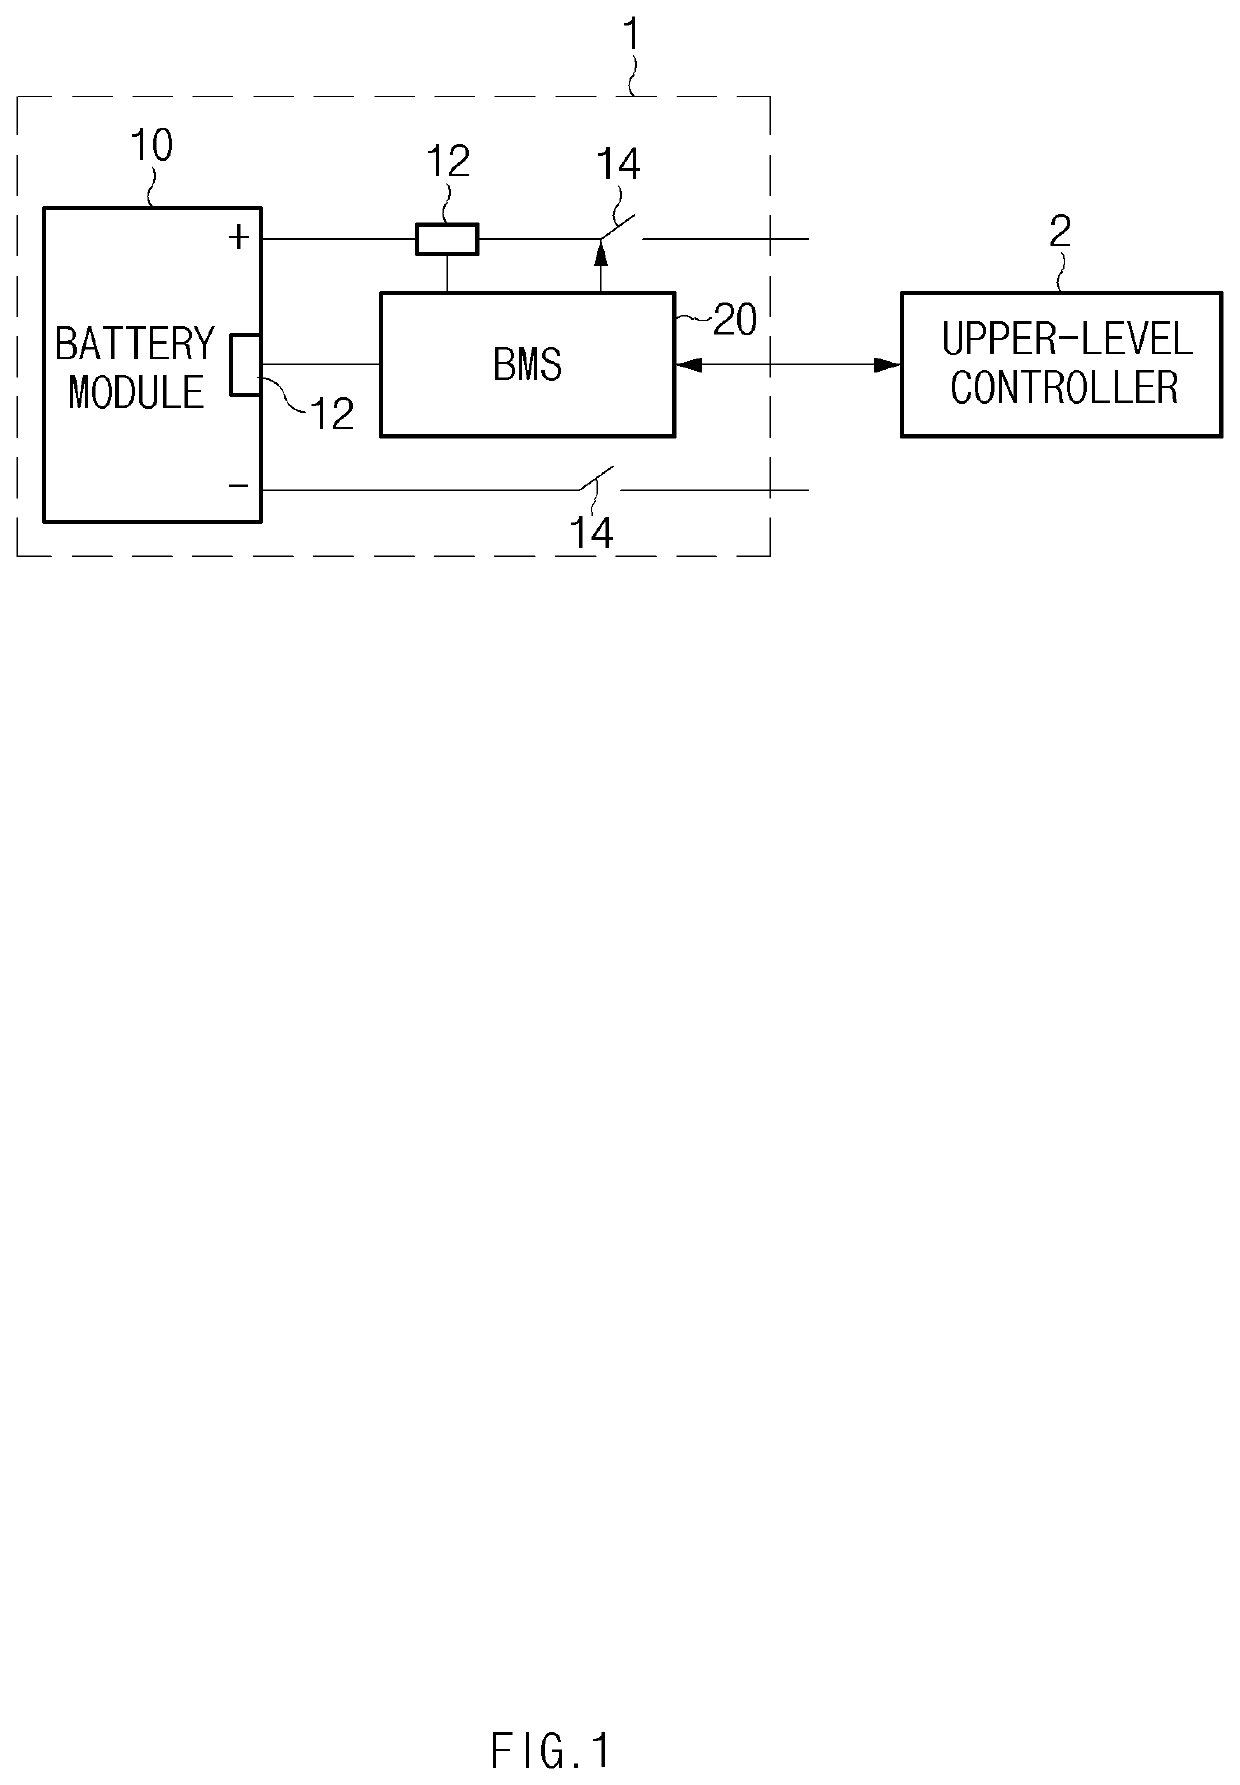 Parallel battery relay diagnostic device and method